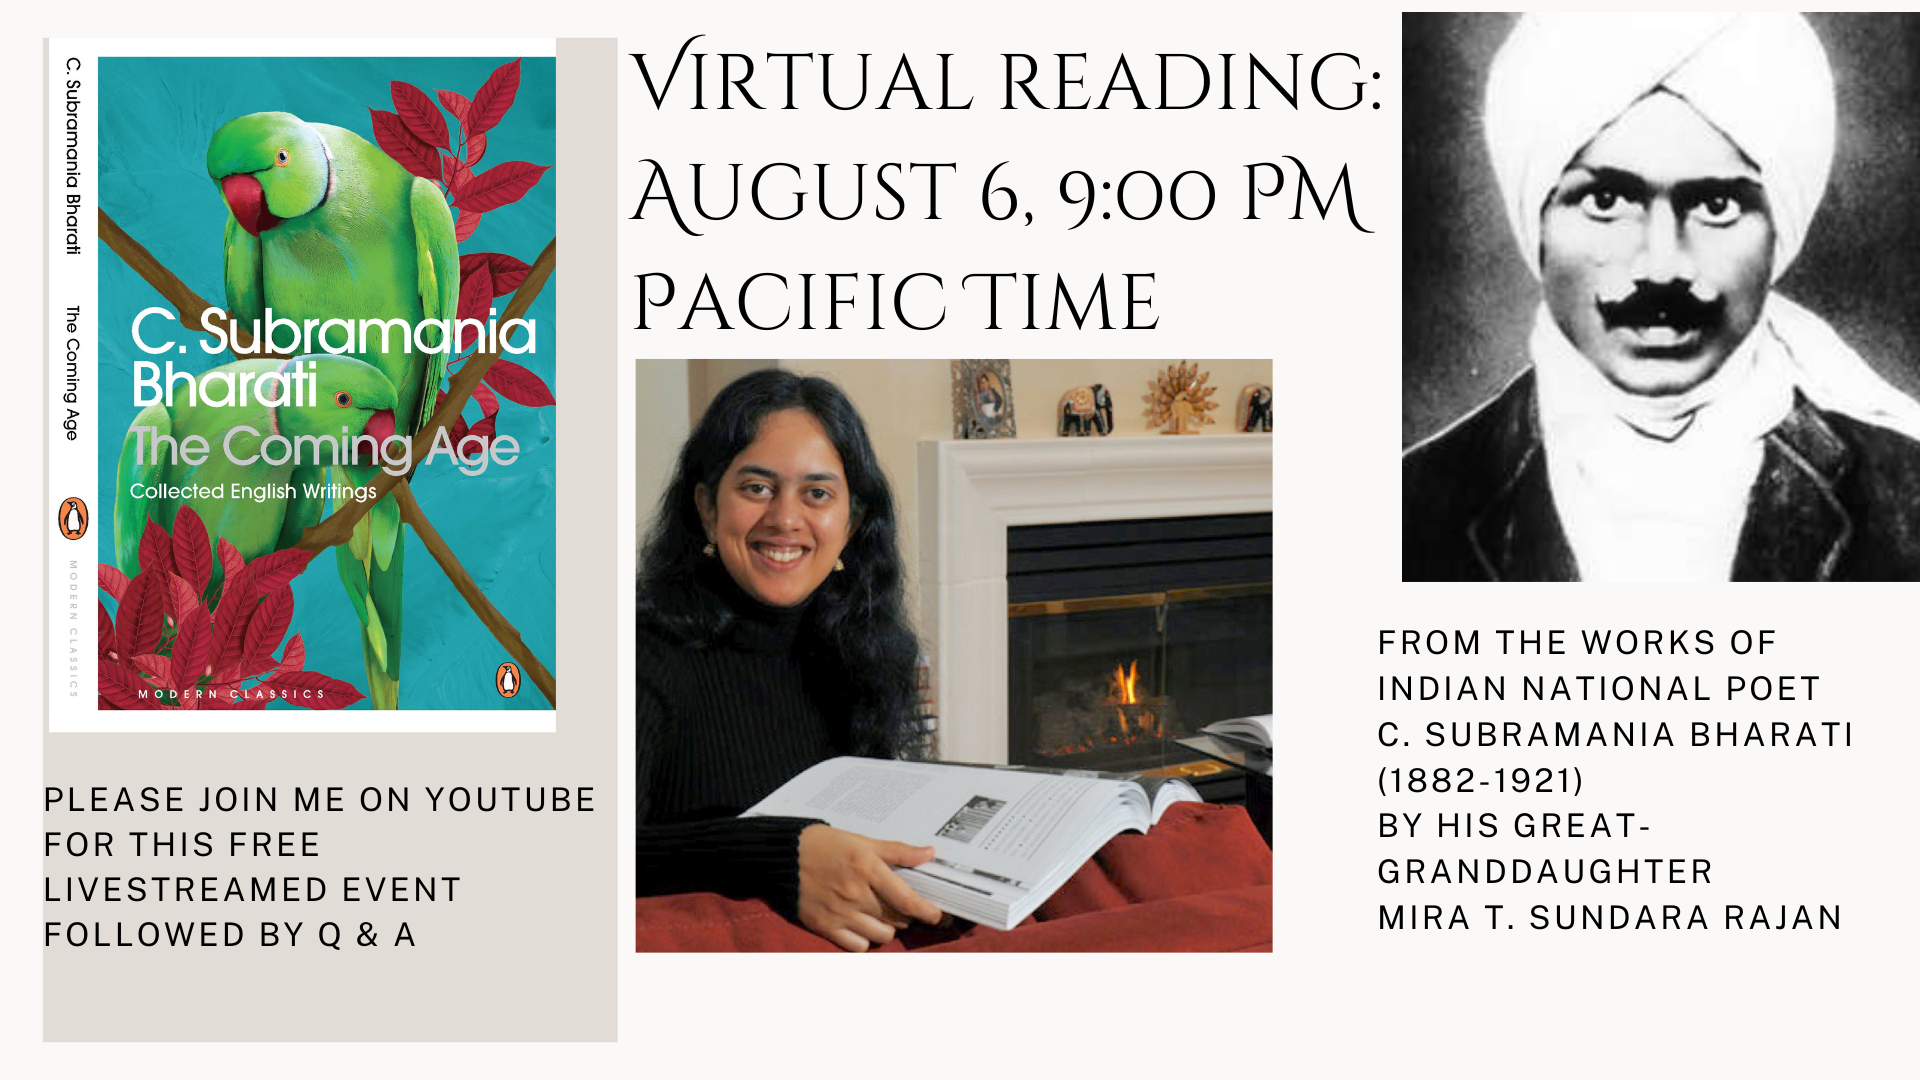 A Virtual Reading from Indian National Poet C. Subramania Bharati (1882-1921) -- August 6@9:00 PM Pacific Time